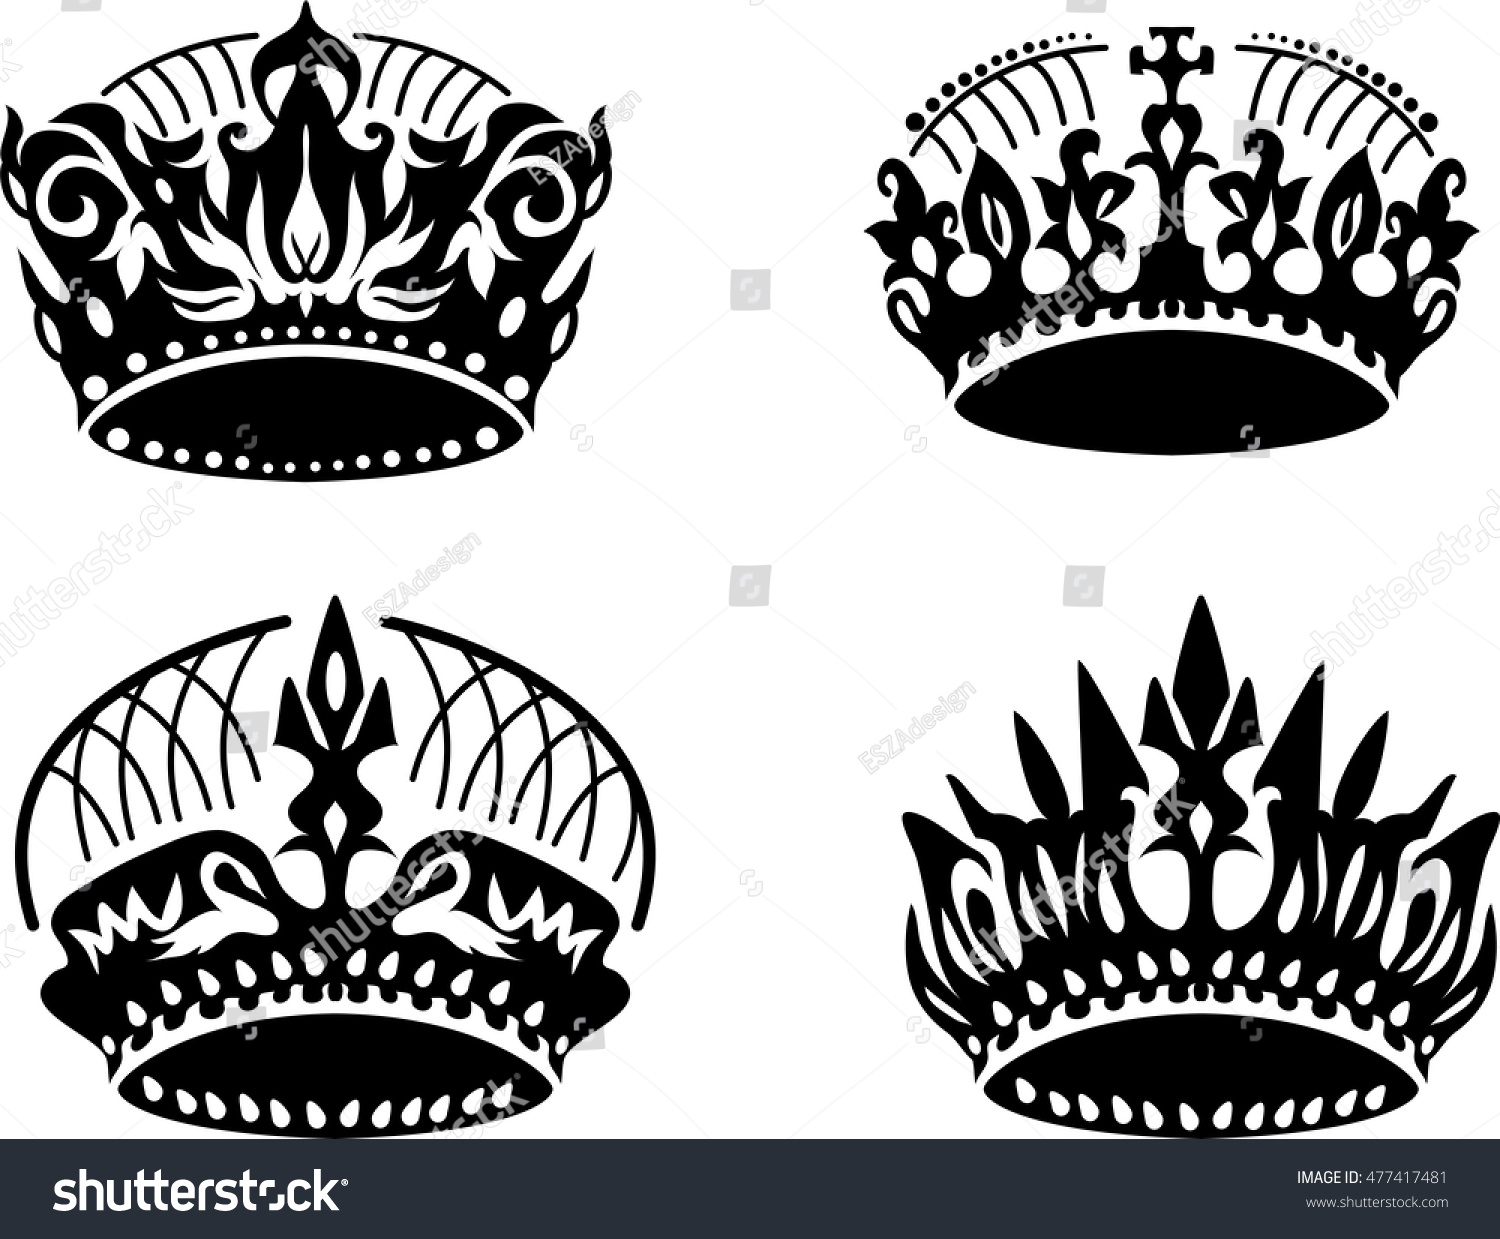 Vector Black Crown Icons Set On Stock Vector 477417481 - Shutterstock